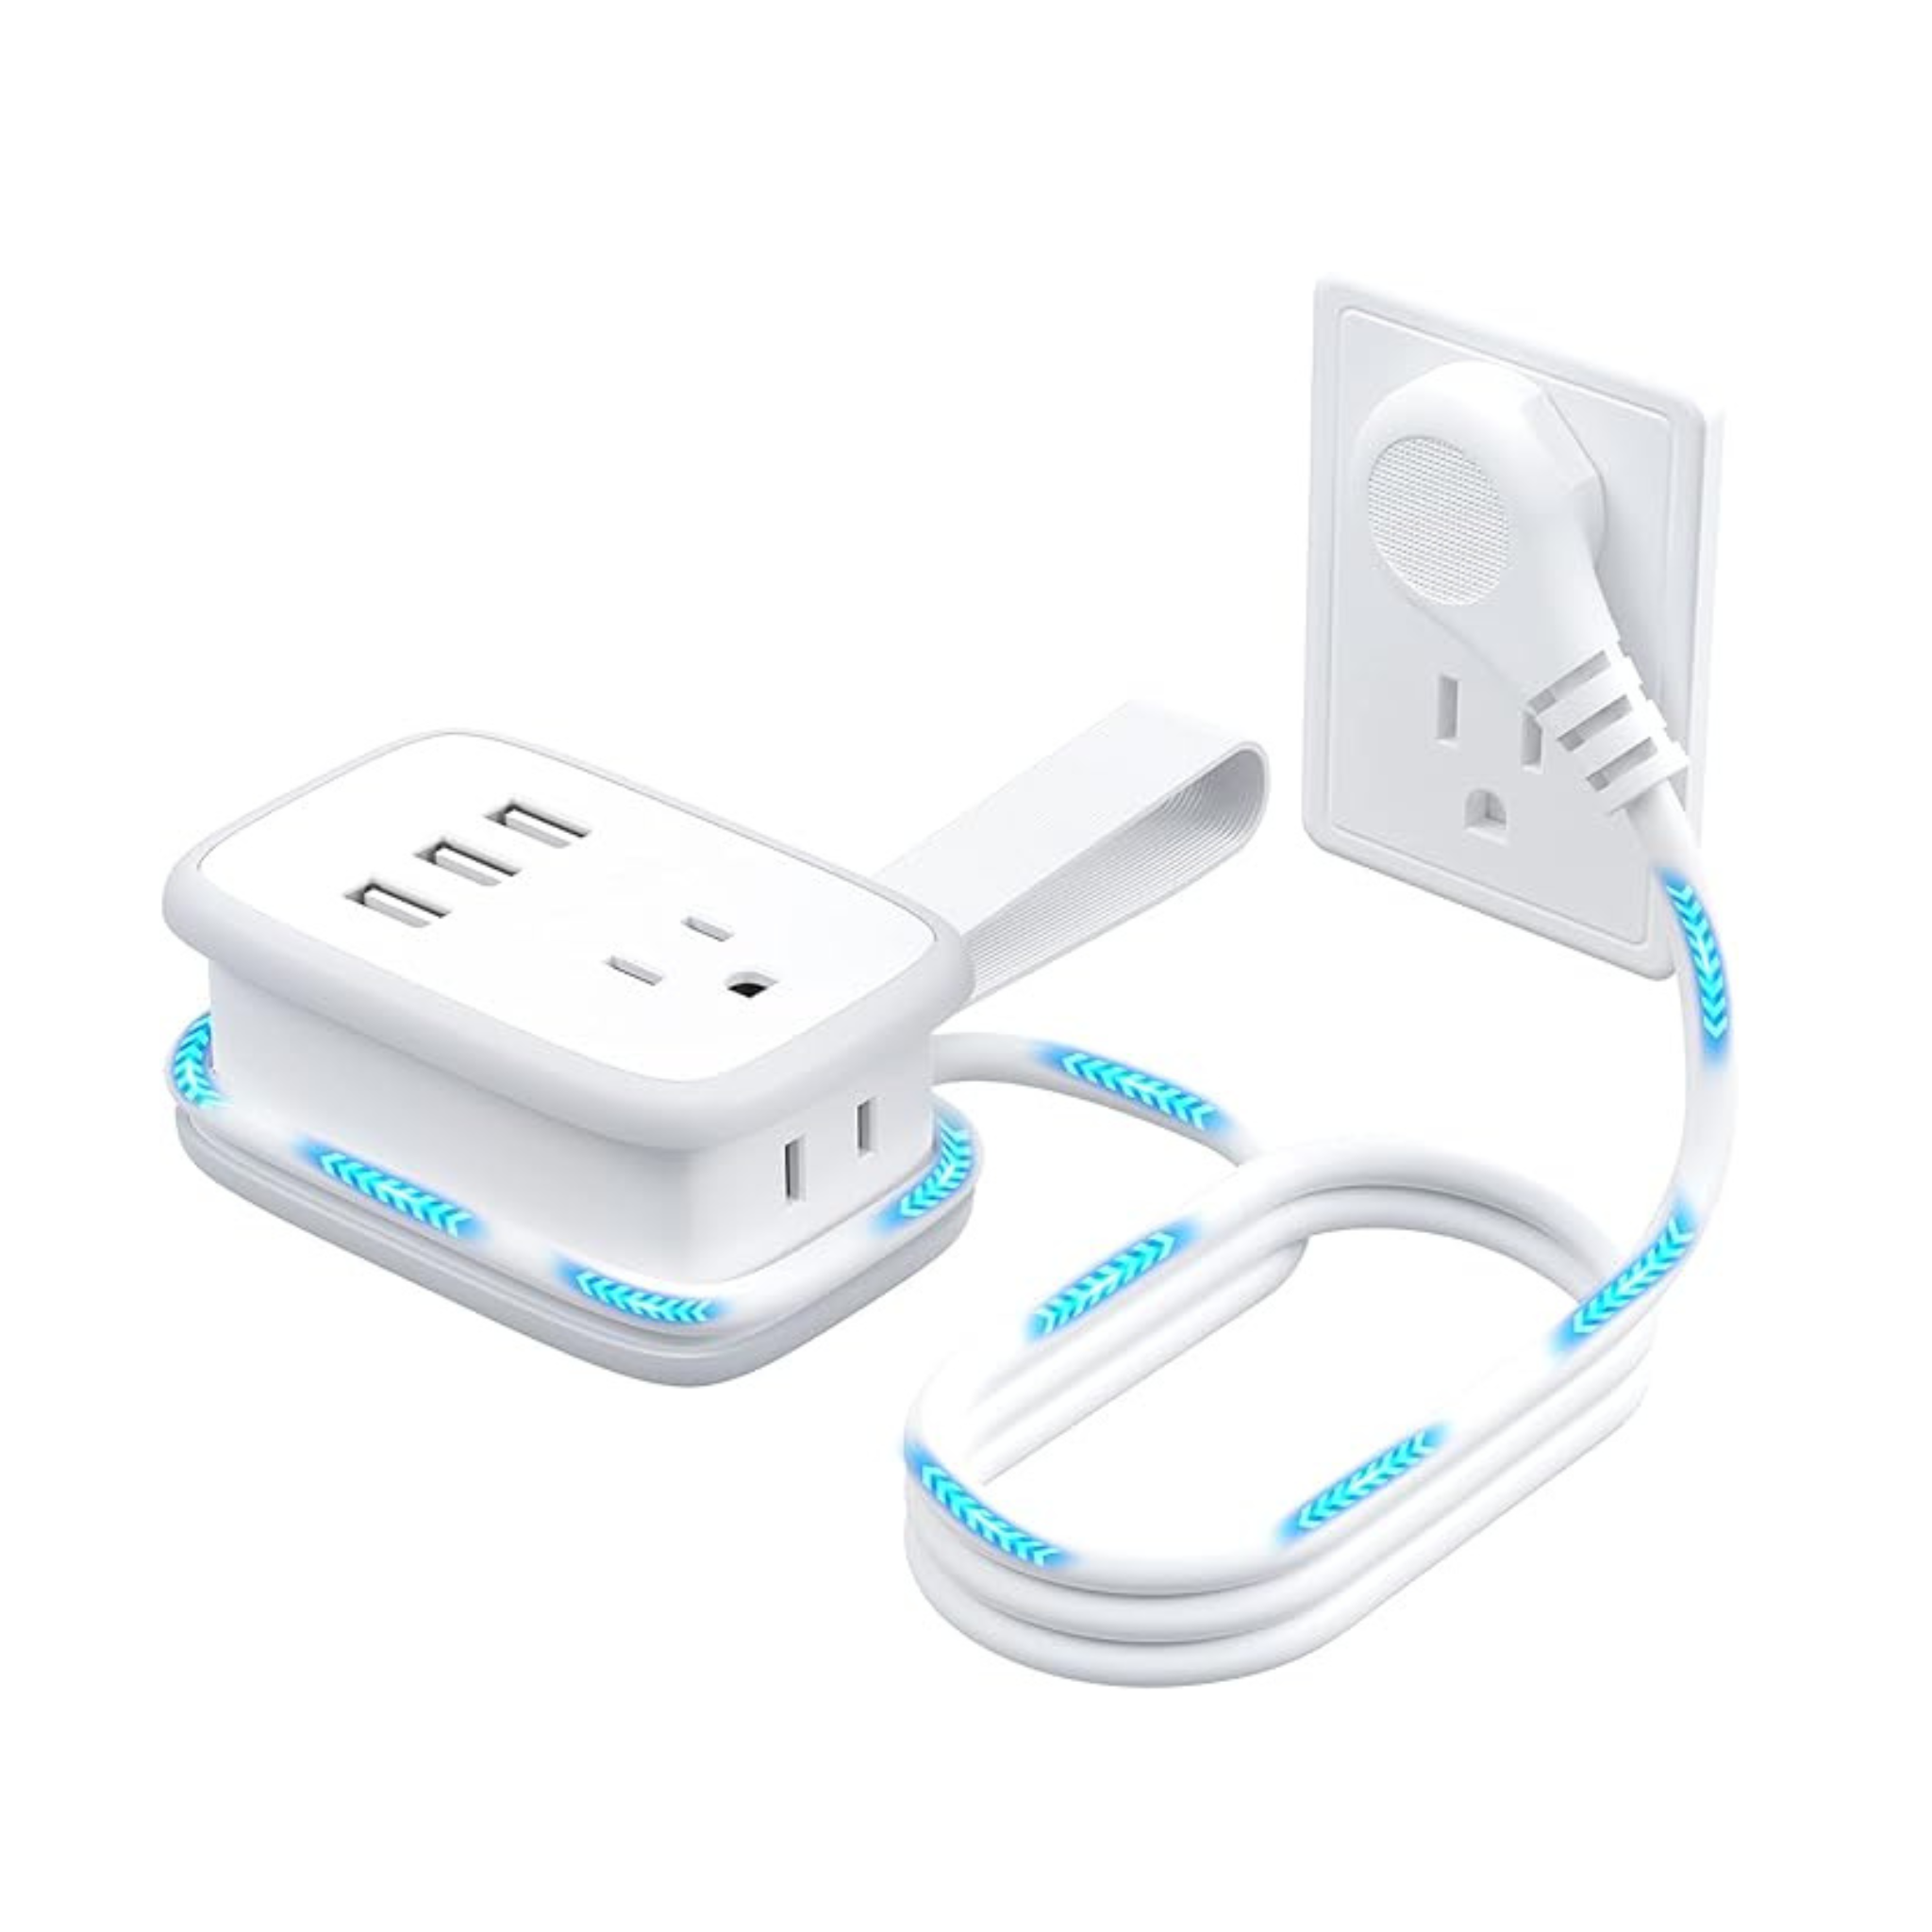 Ntonpower 2-Outlet 3-USB Ports 3ft Travel Power Strip